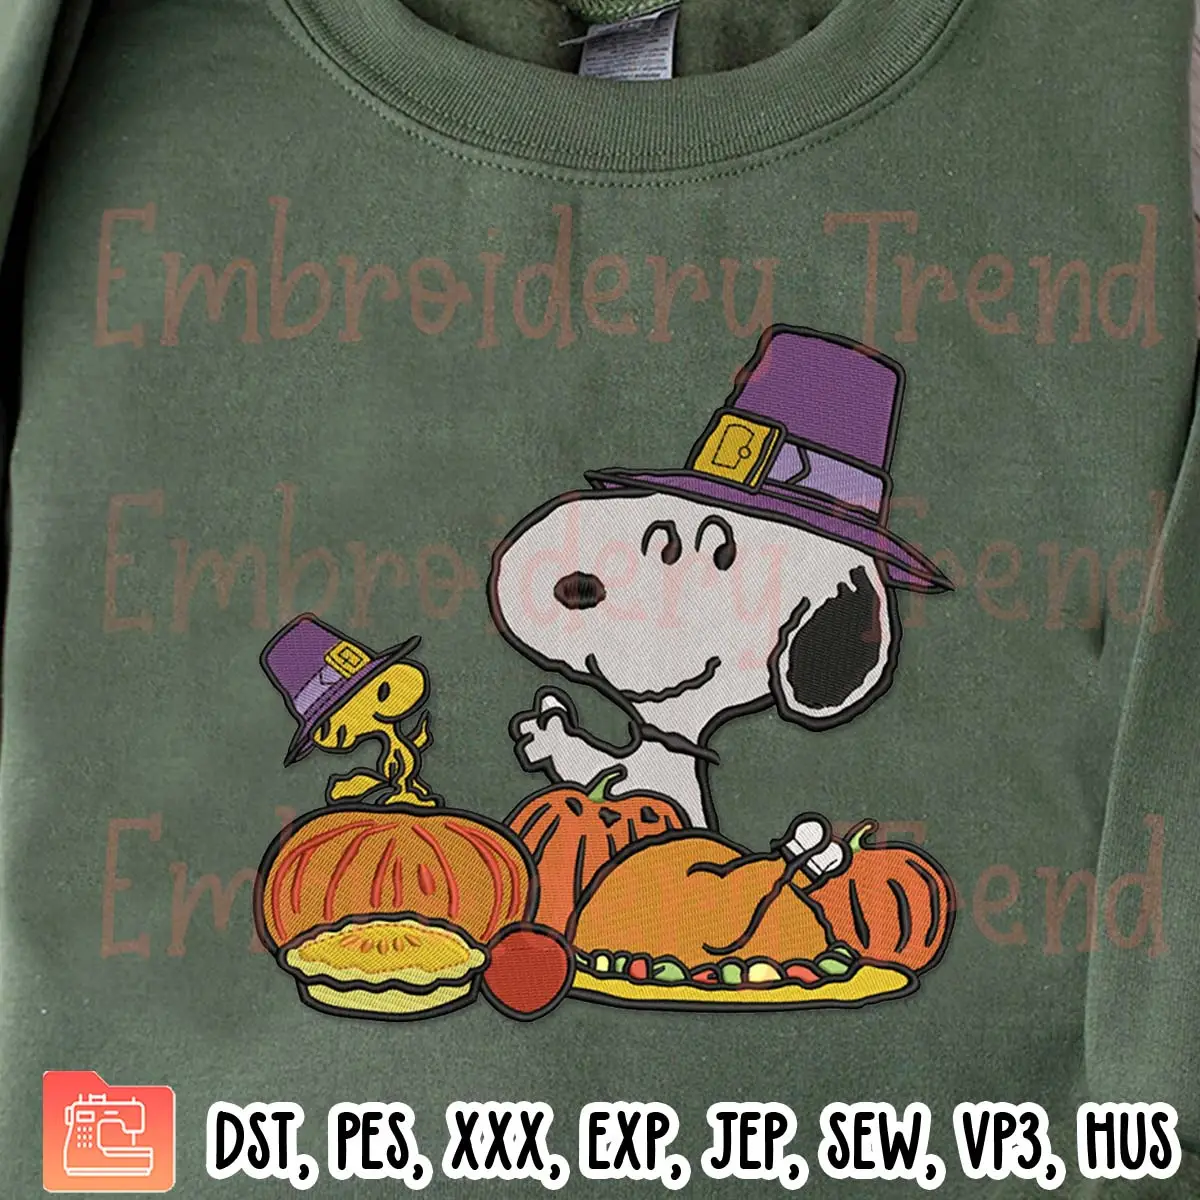 Thanksgiving Peanuts Snoopy And Woodstock Embroidery Design, Thanksgiving Day Embroidery Digitizing File